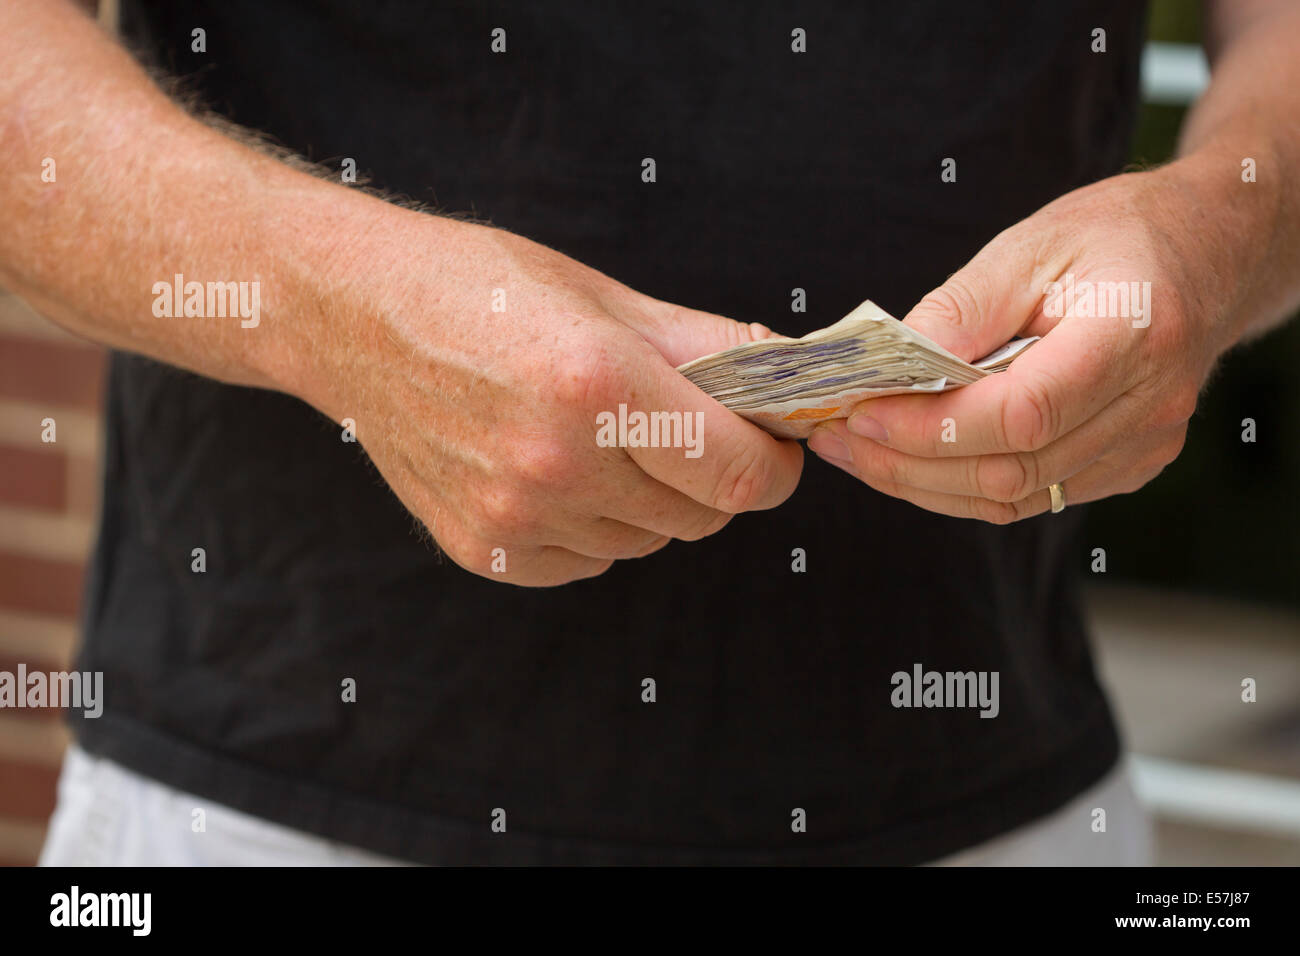 Handing over UK cash notes. Counting money maybe about to pay in cash.Money is UK cash sterling. Stock Photo